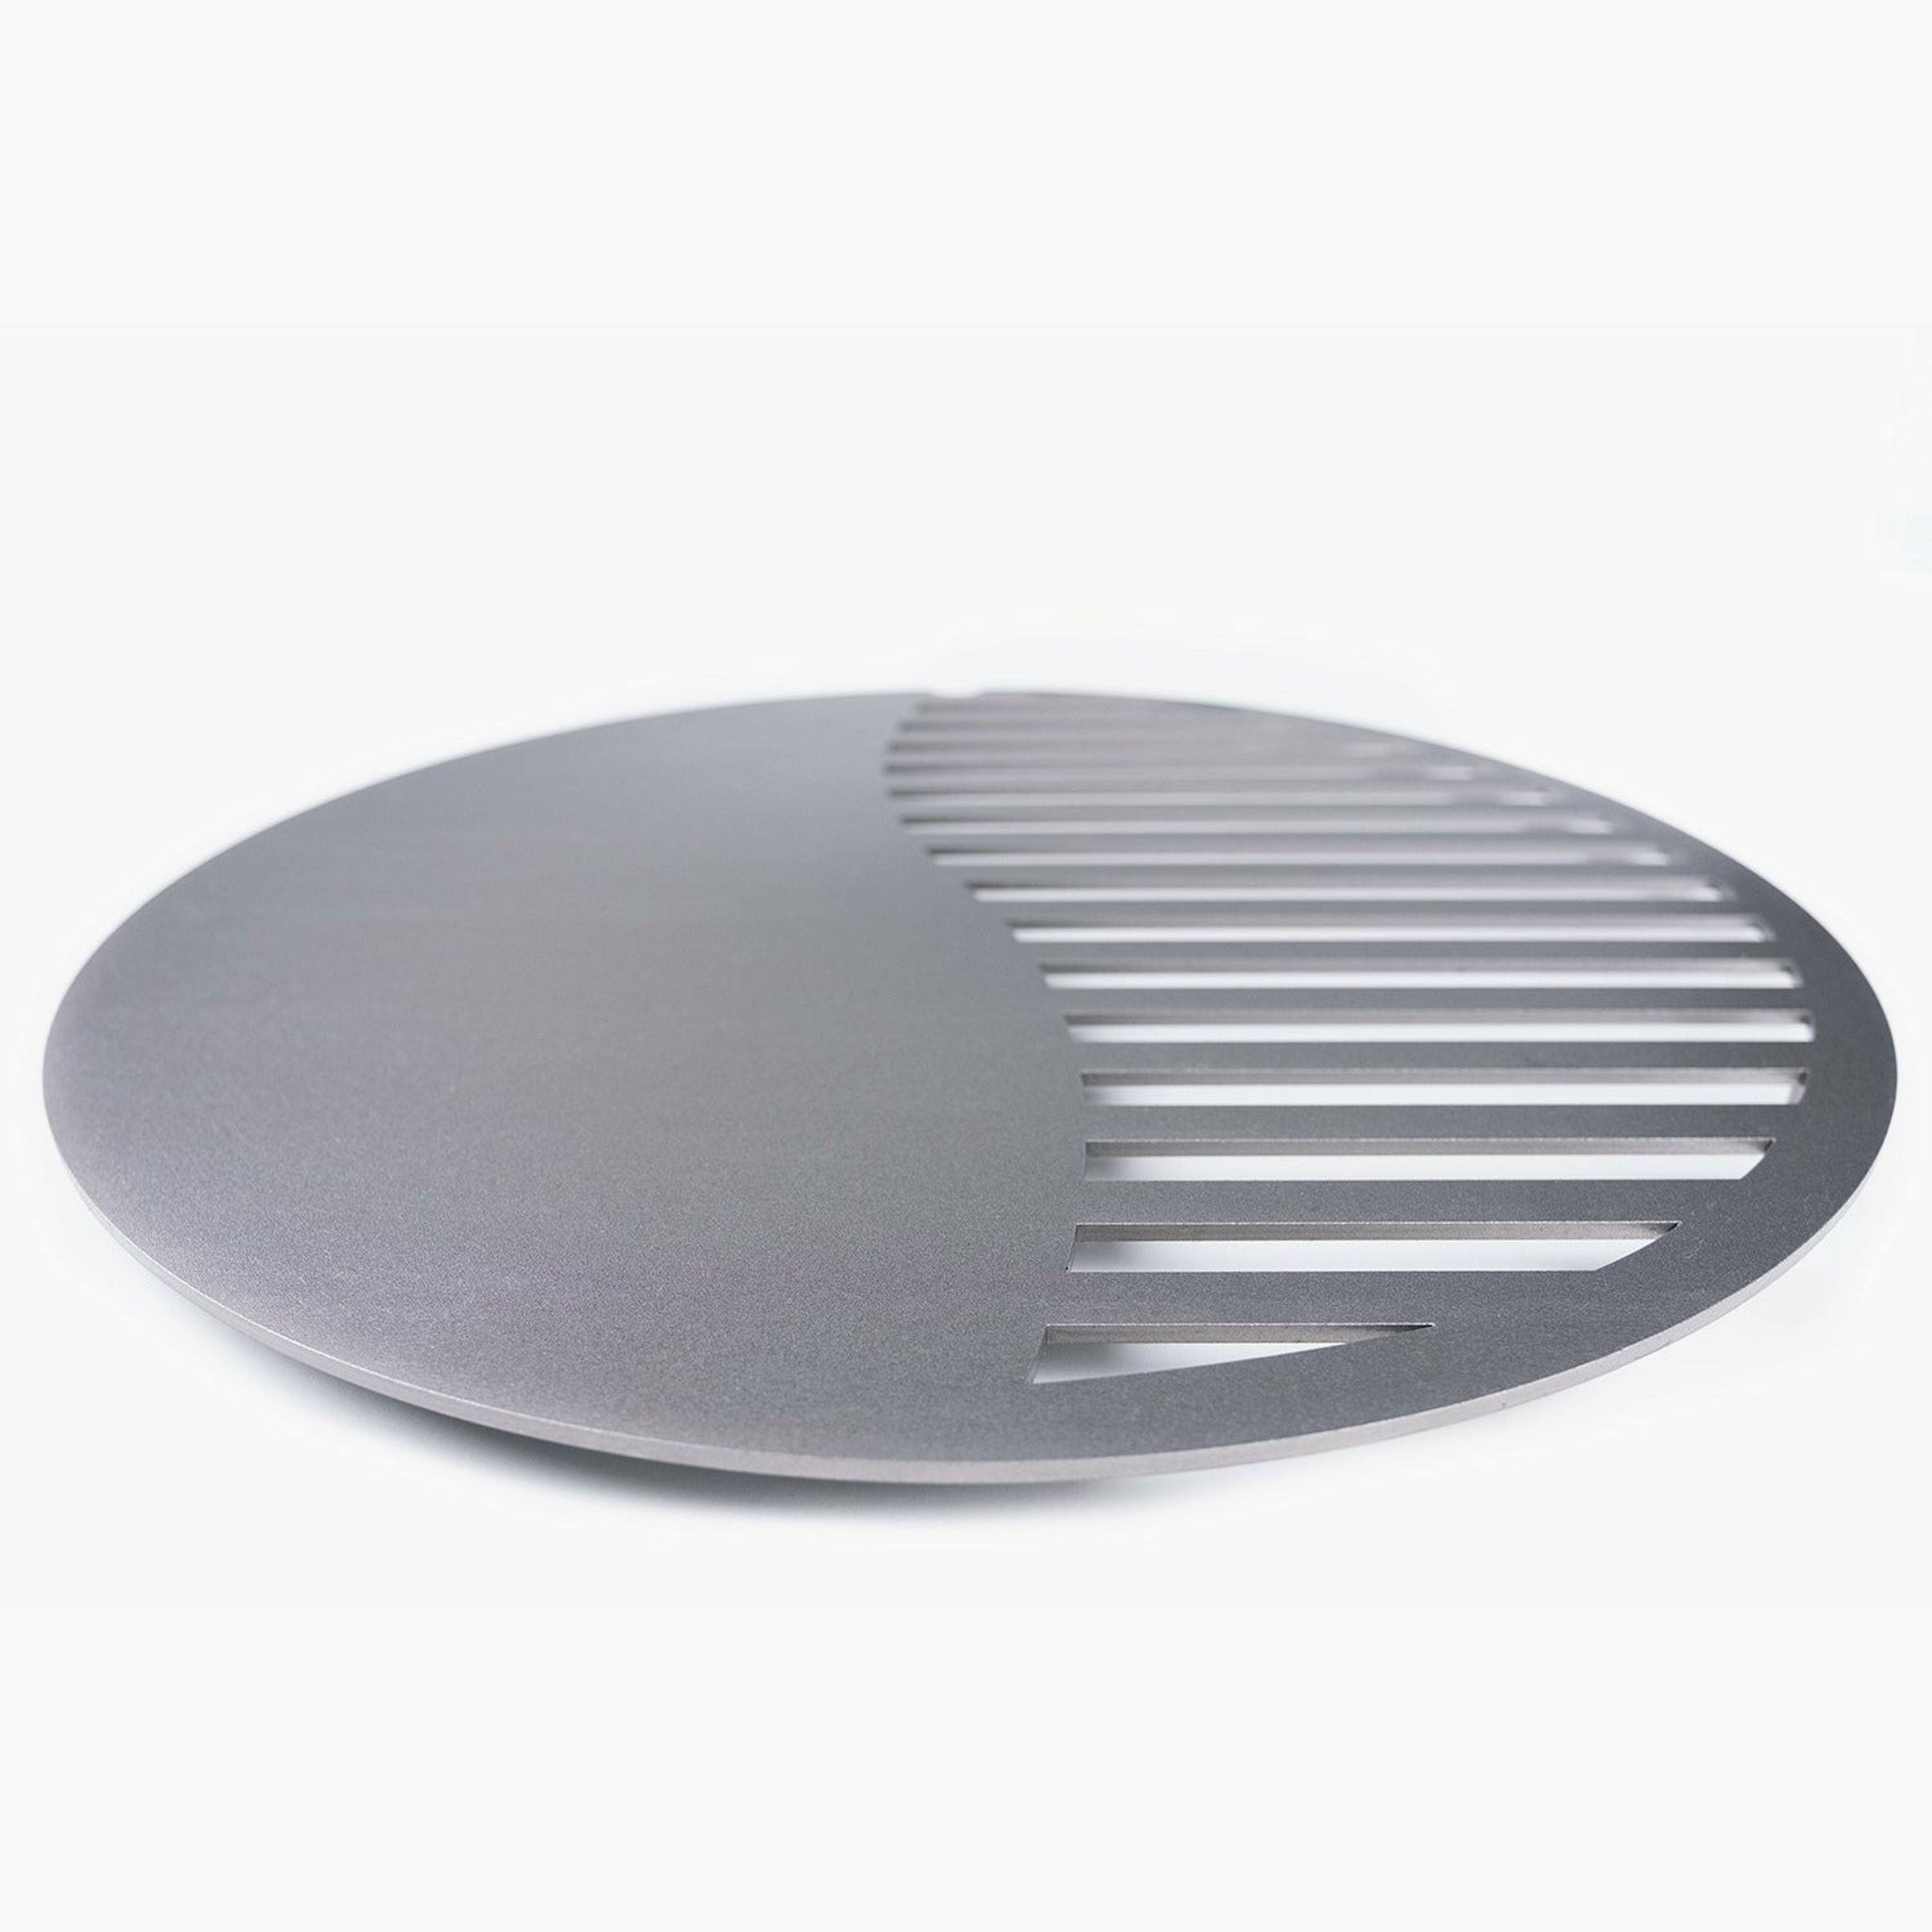 Griddle Insert For Charcoal Grills